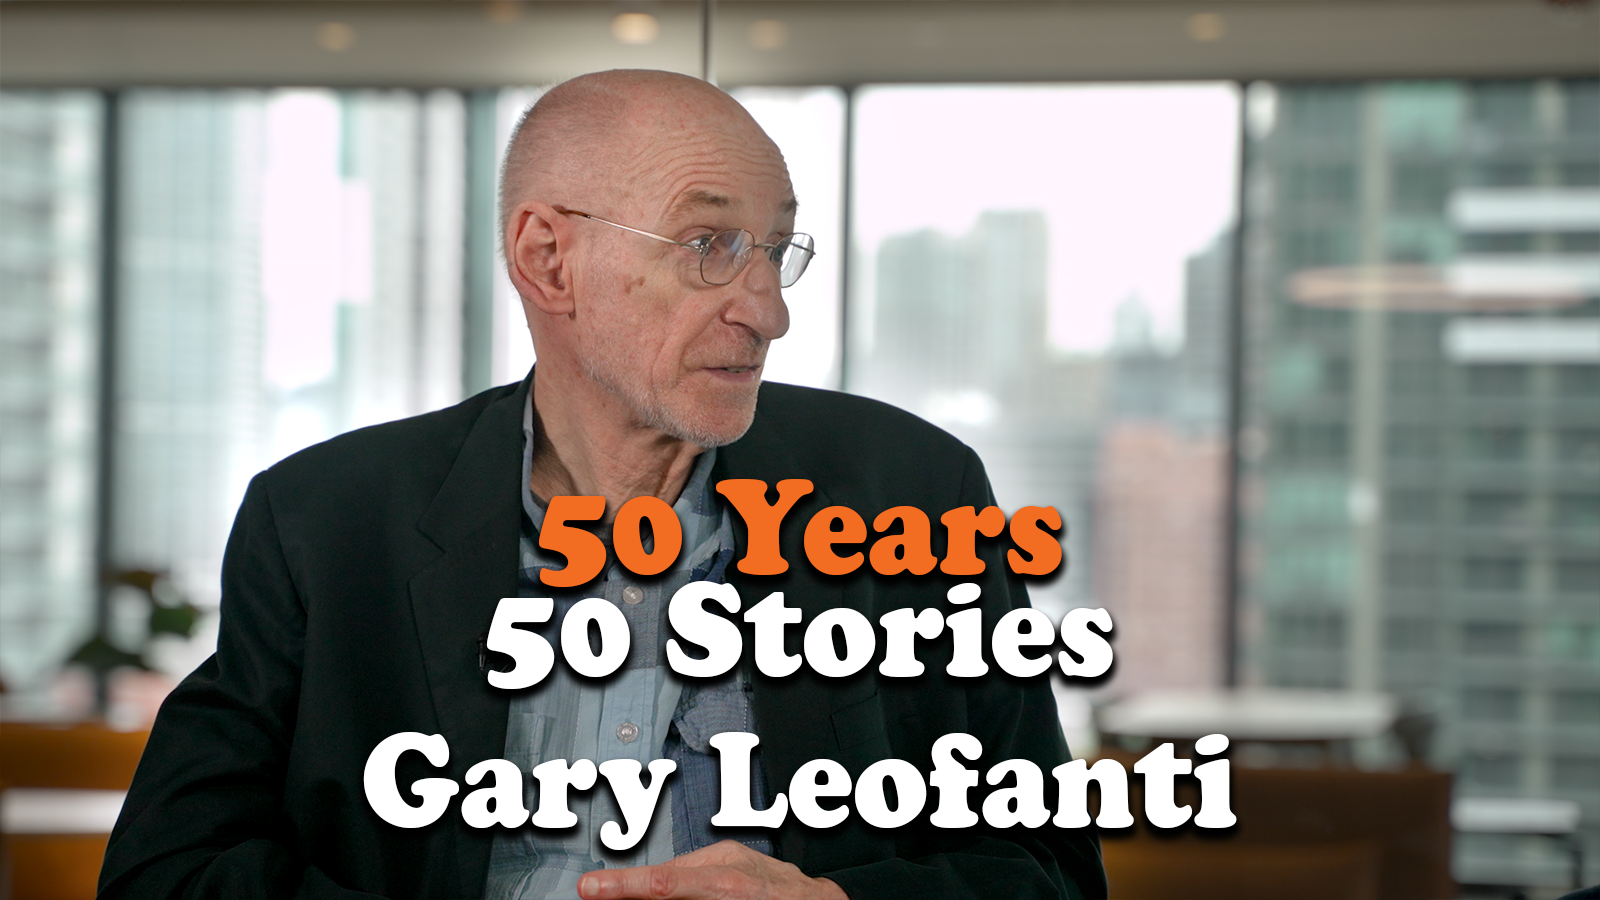 Gary Leofanti was Aunt Martha's founding executive director. He retired in 2013 after 41 years.